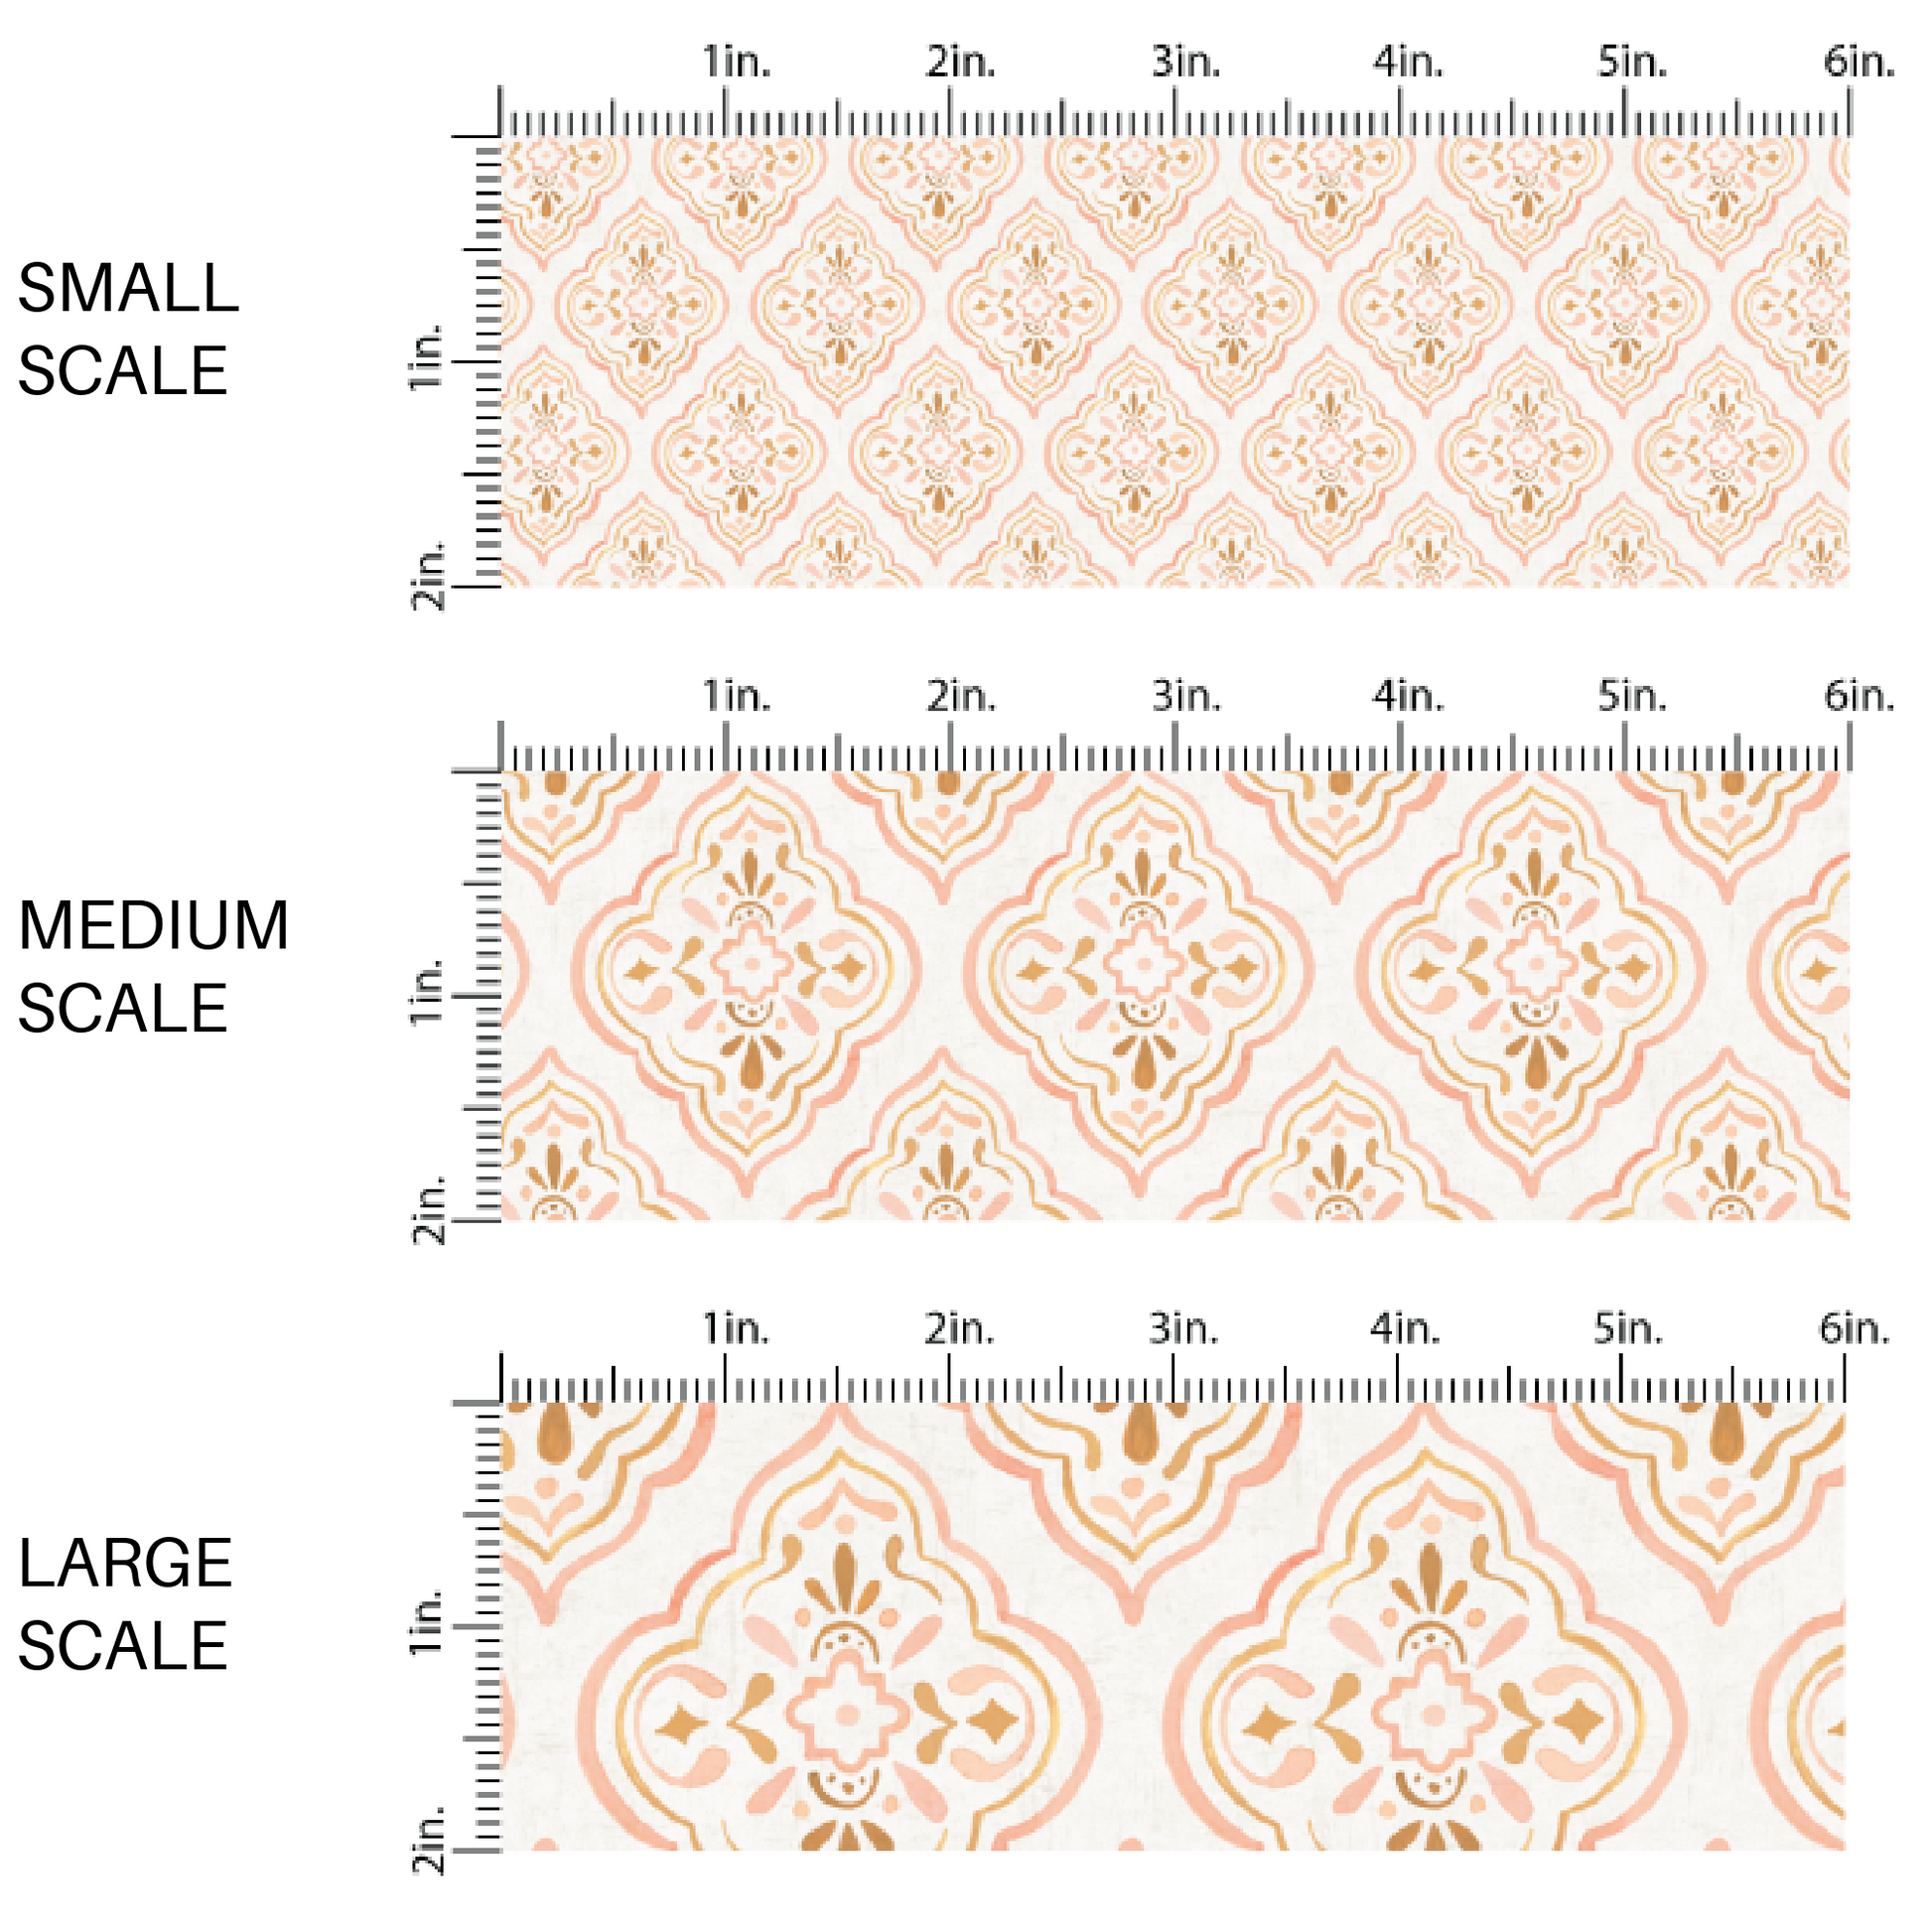 This scale chart of small scale, medium scale, and large scale of these boho pattern themed fabric by the yard features cream boho medallion pattern. This fun pattern fabric can be used for all your sewing and crafting needs!